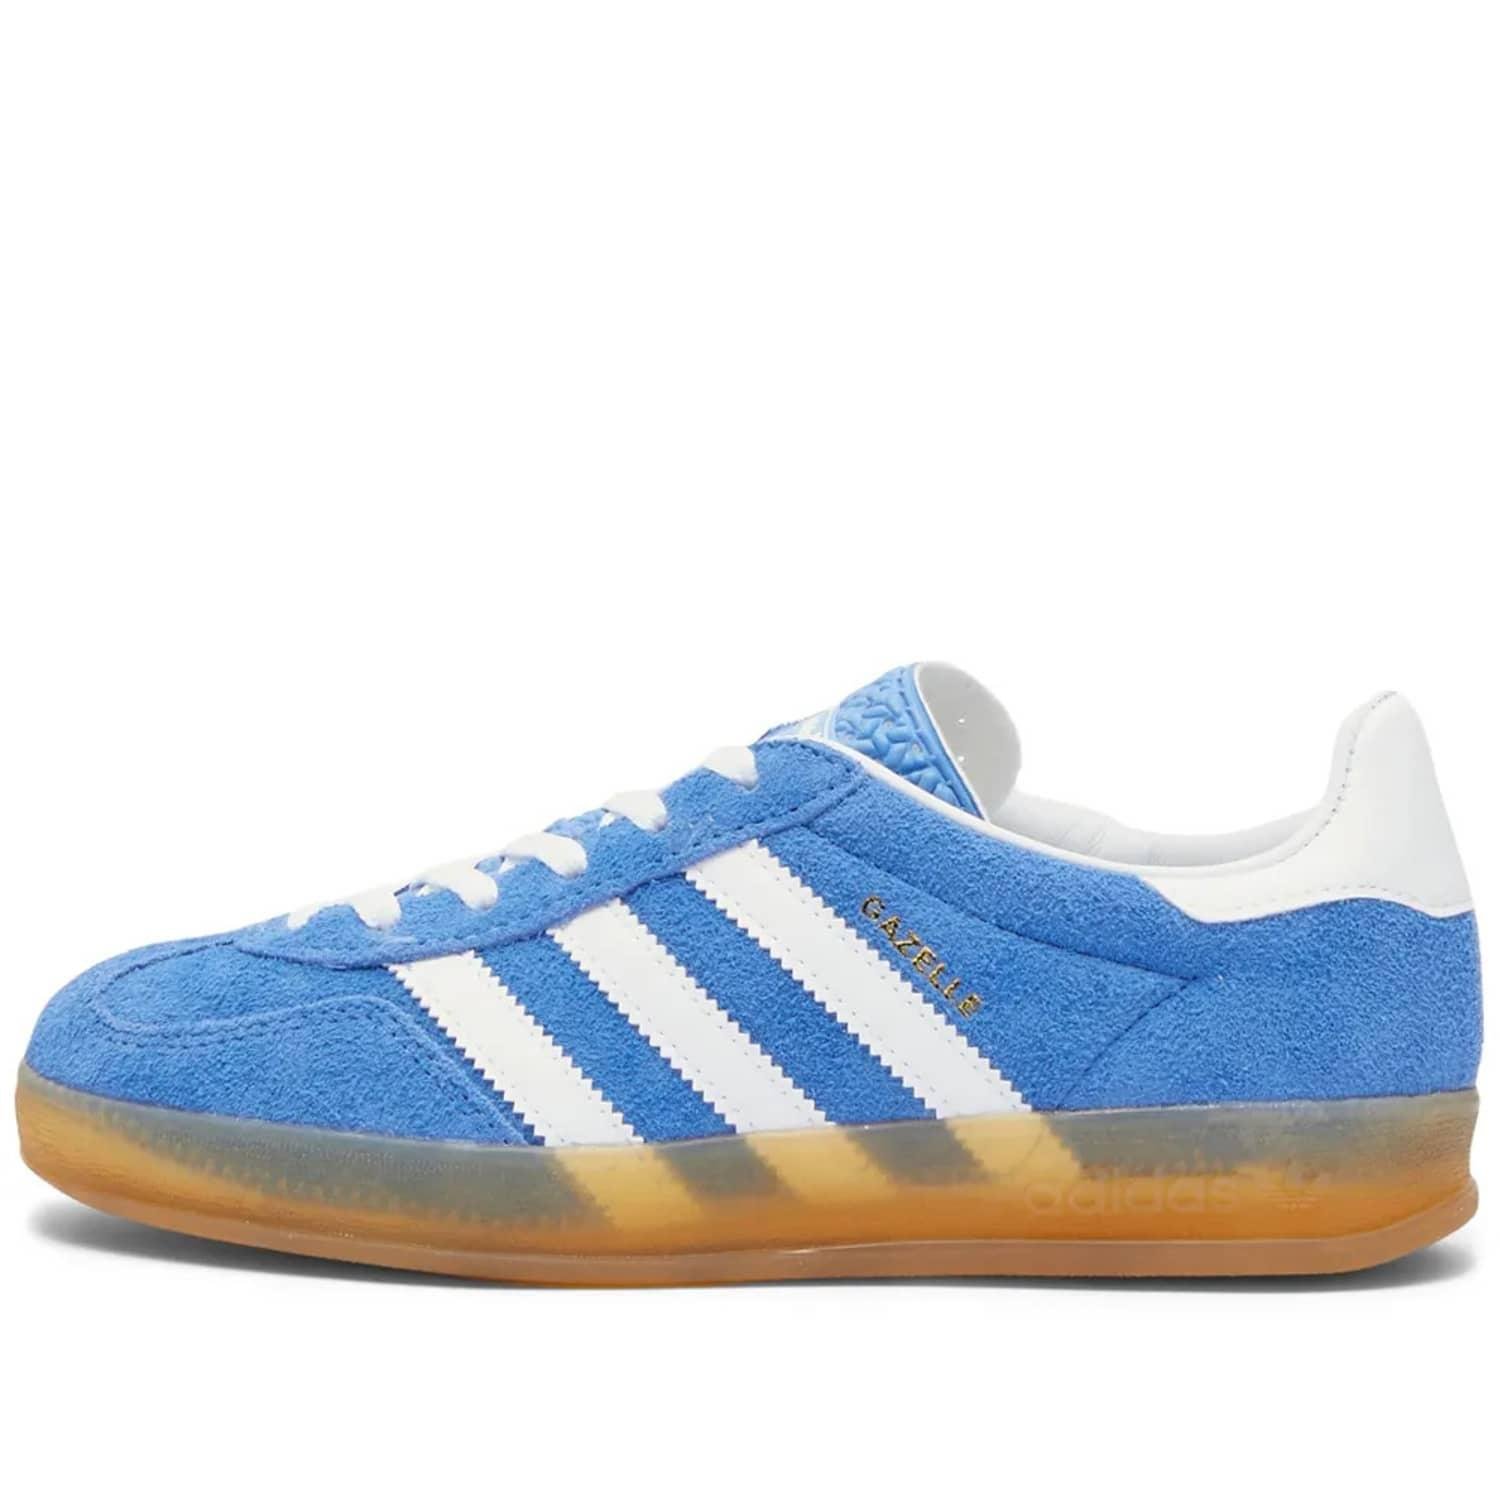 adidas Gazelle | for Men Trainers in Lyst Blue